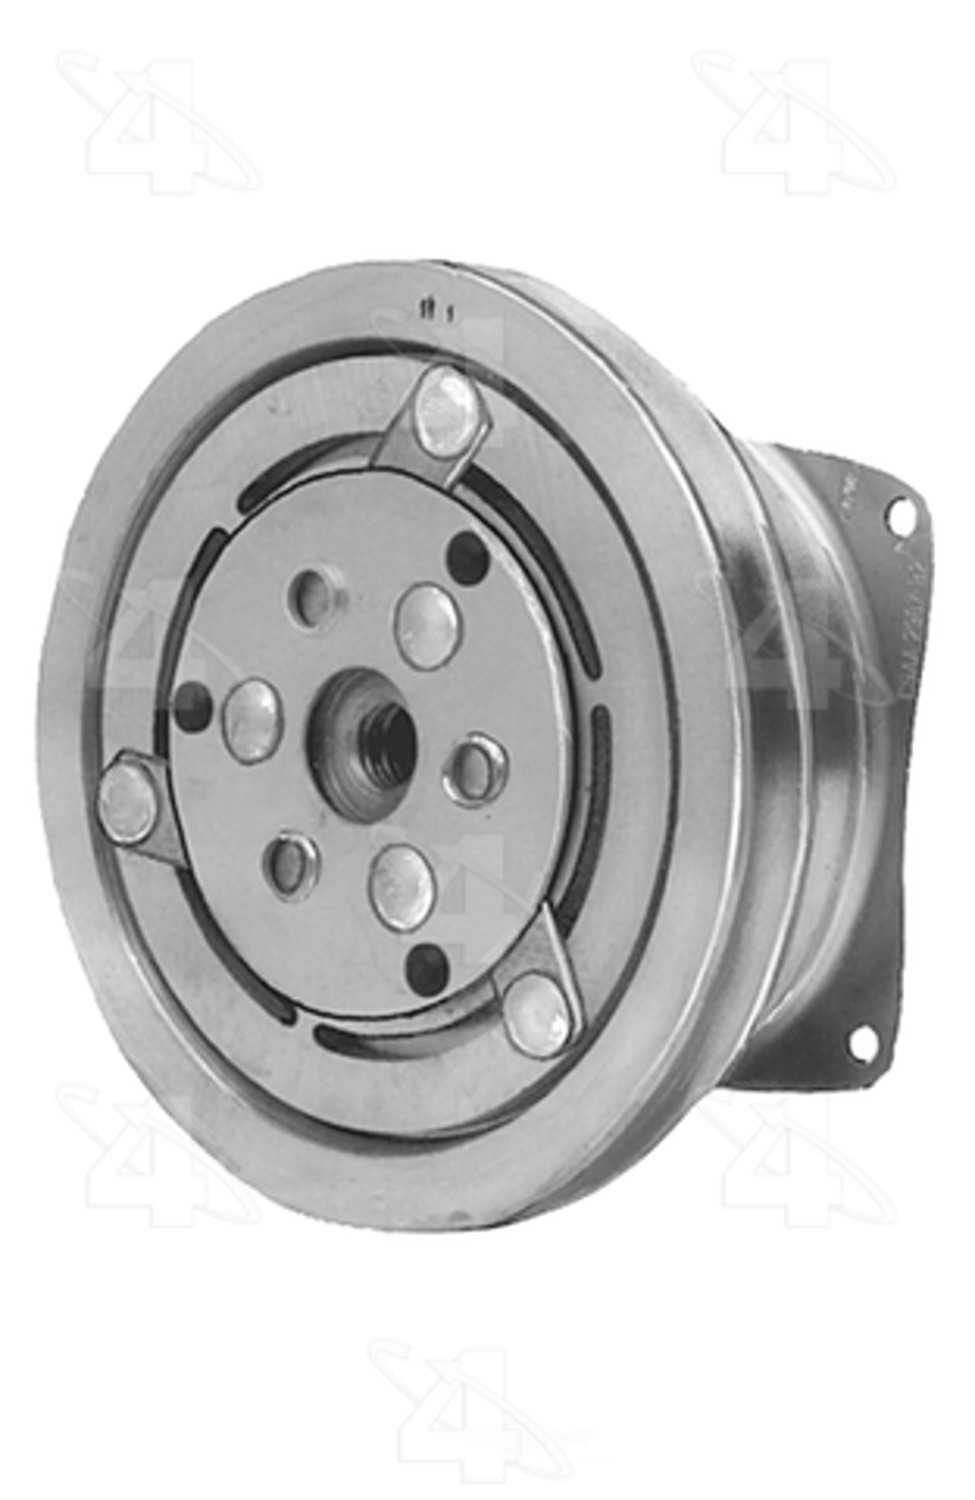 FOUR SEASONS - New Clutch Assembly - FSE 47809